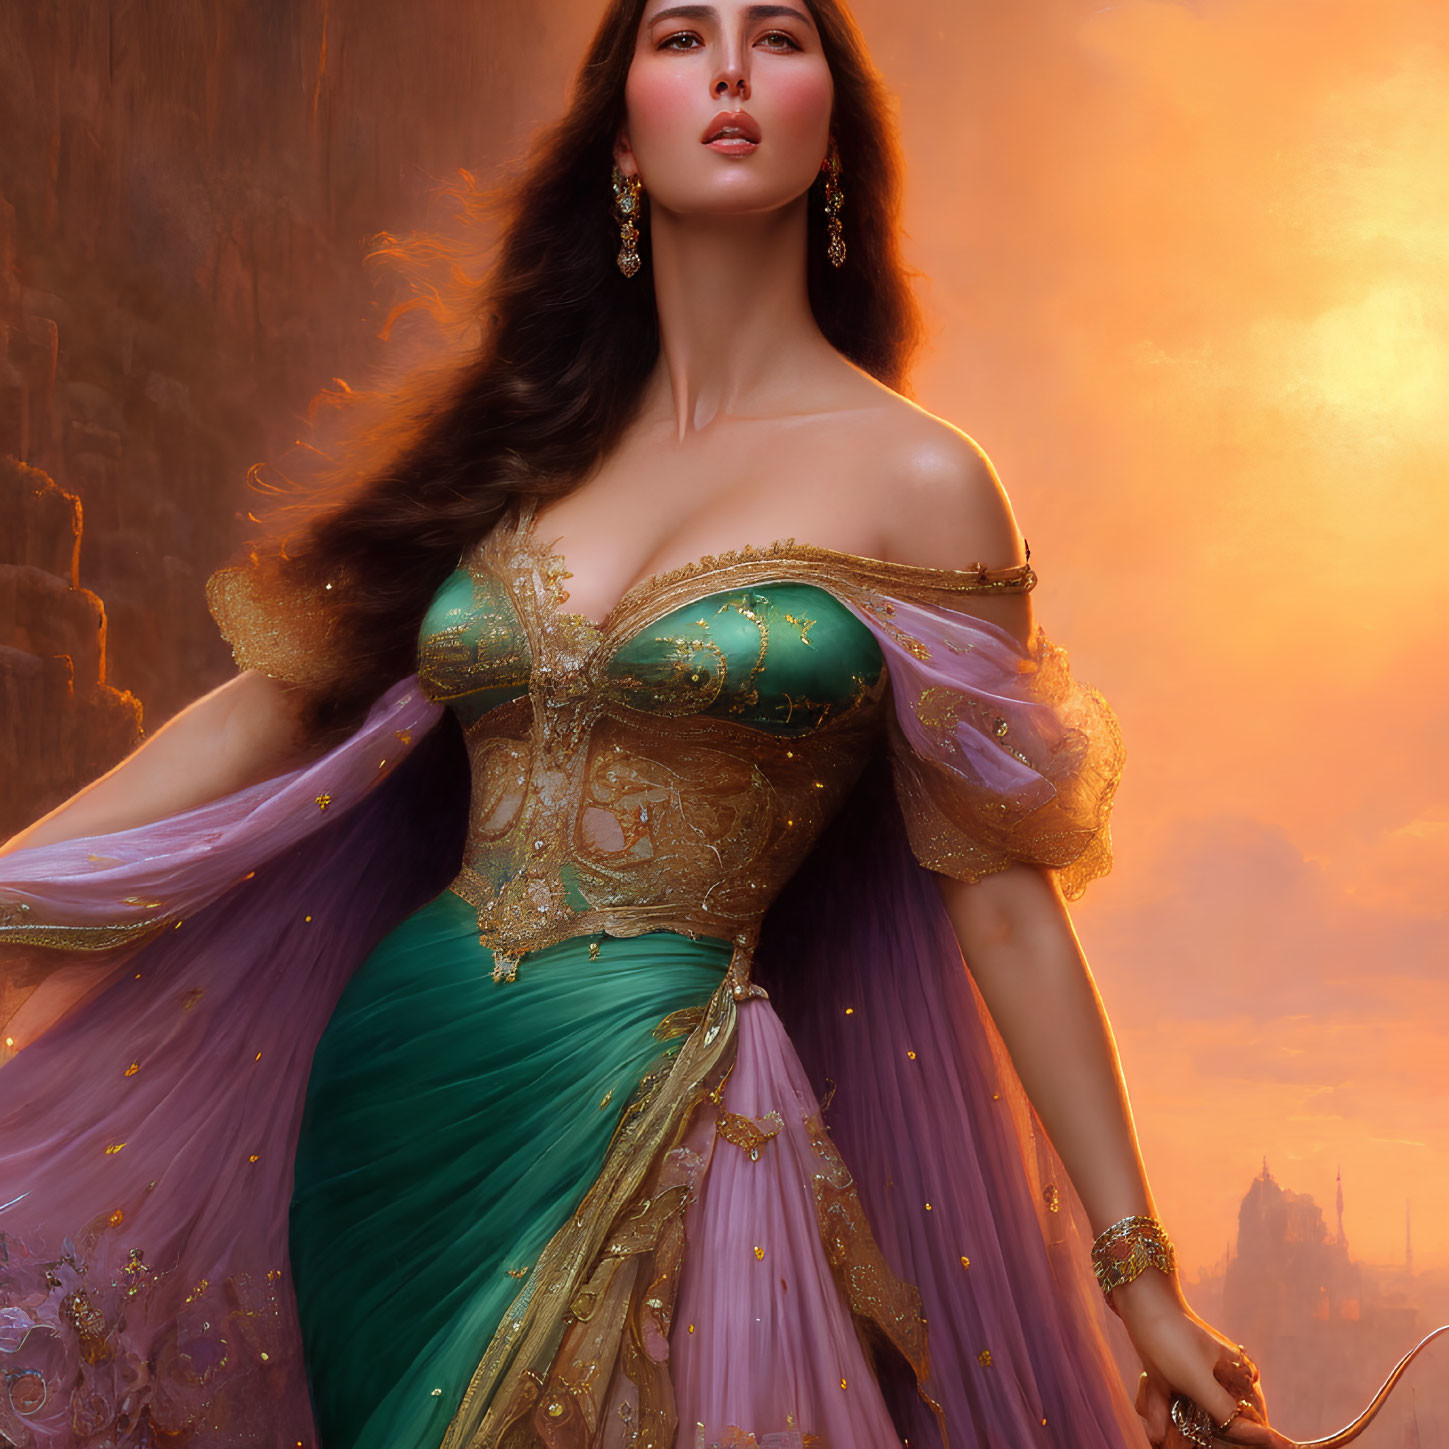 Illustrated woman in green and purple gown with gold accents against sunset backdrop